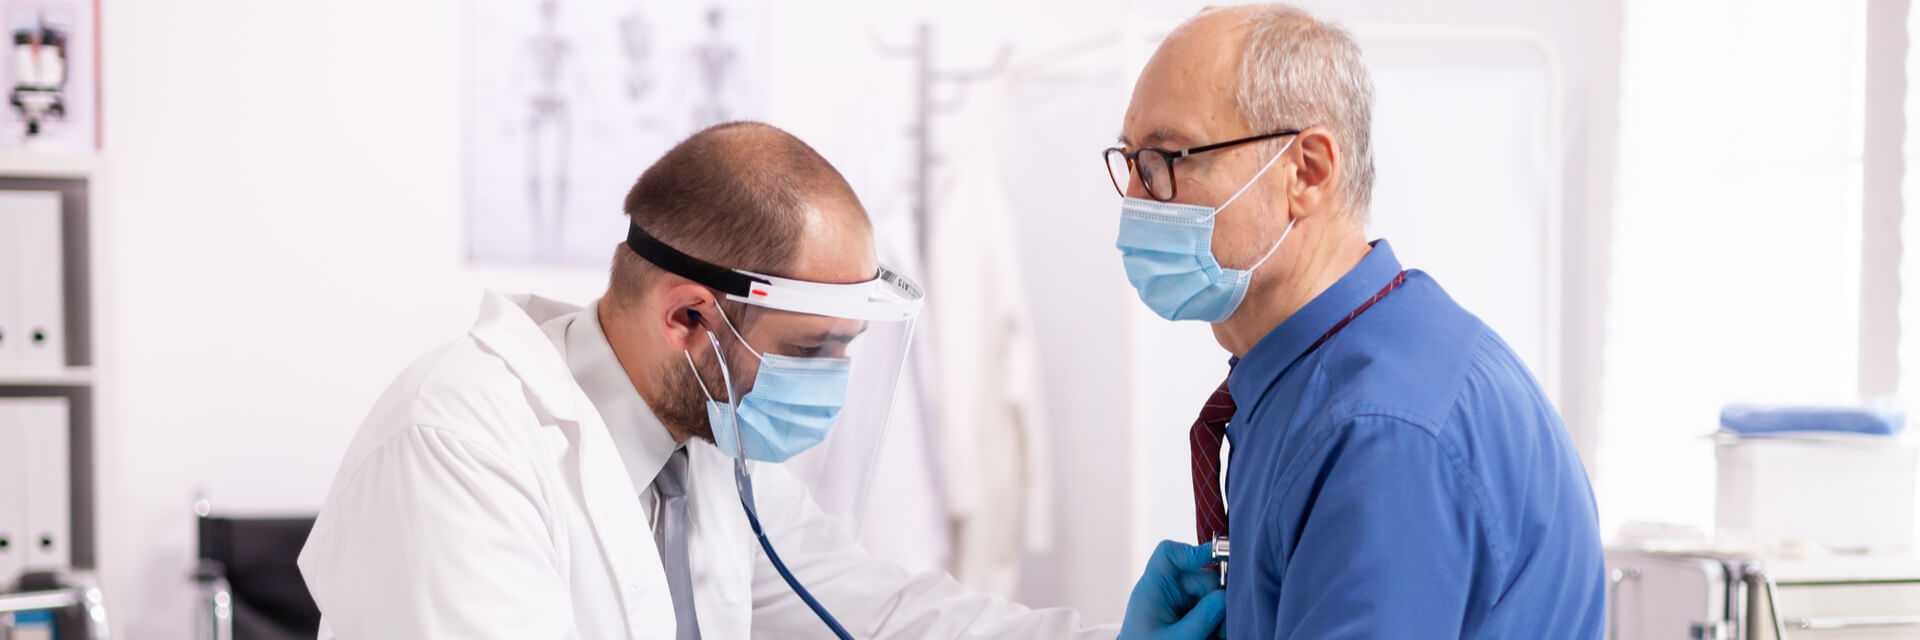 Doctor examining patient lungs using stethoscope wearing face mask